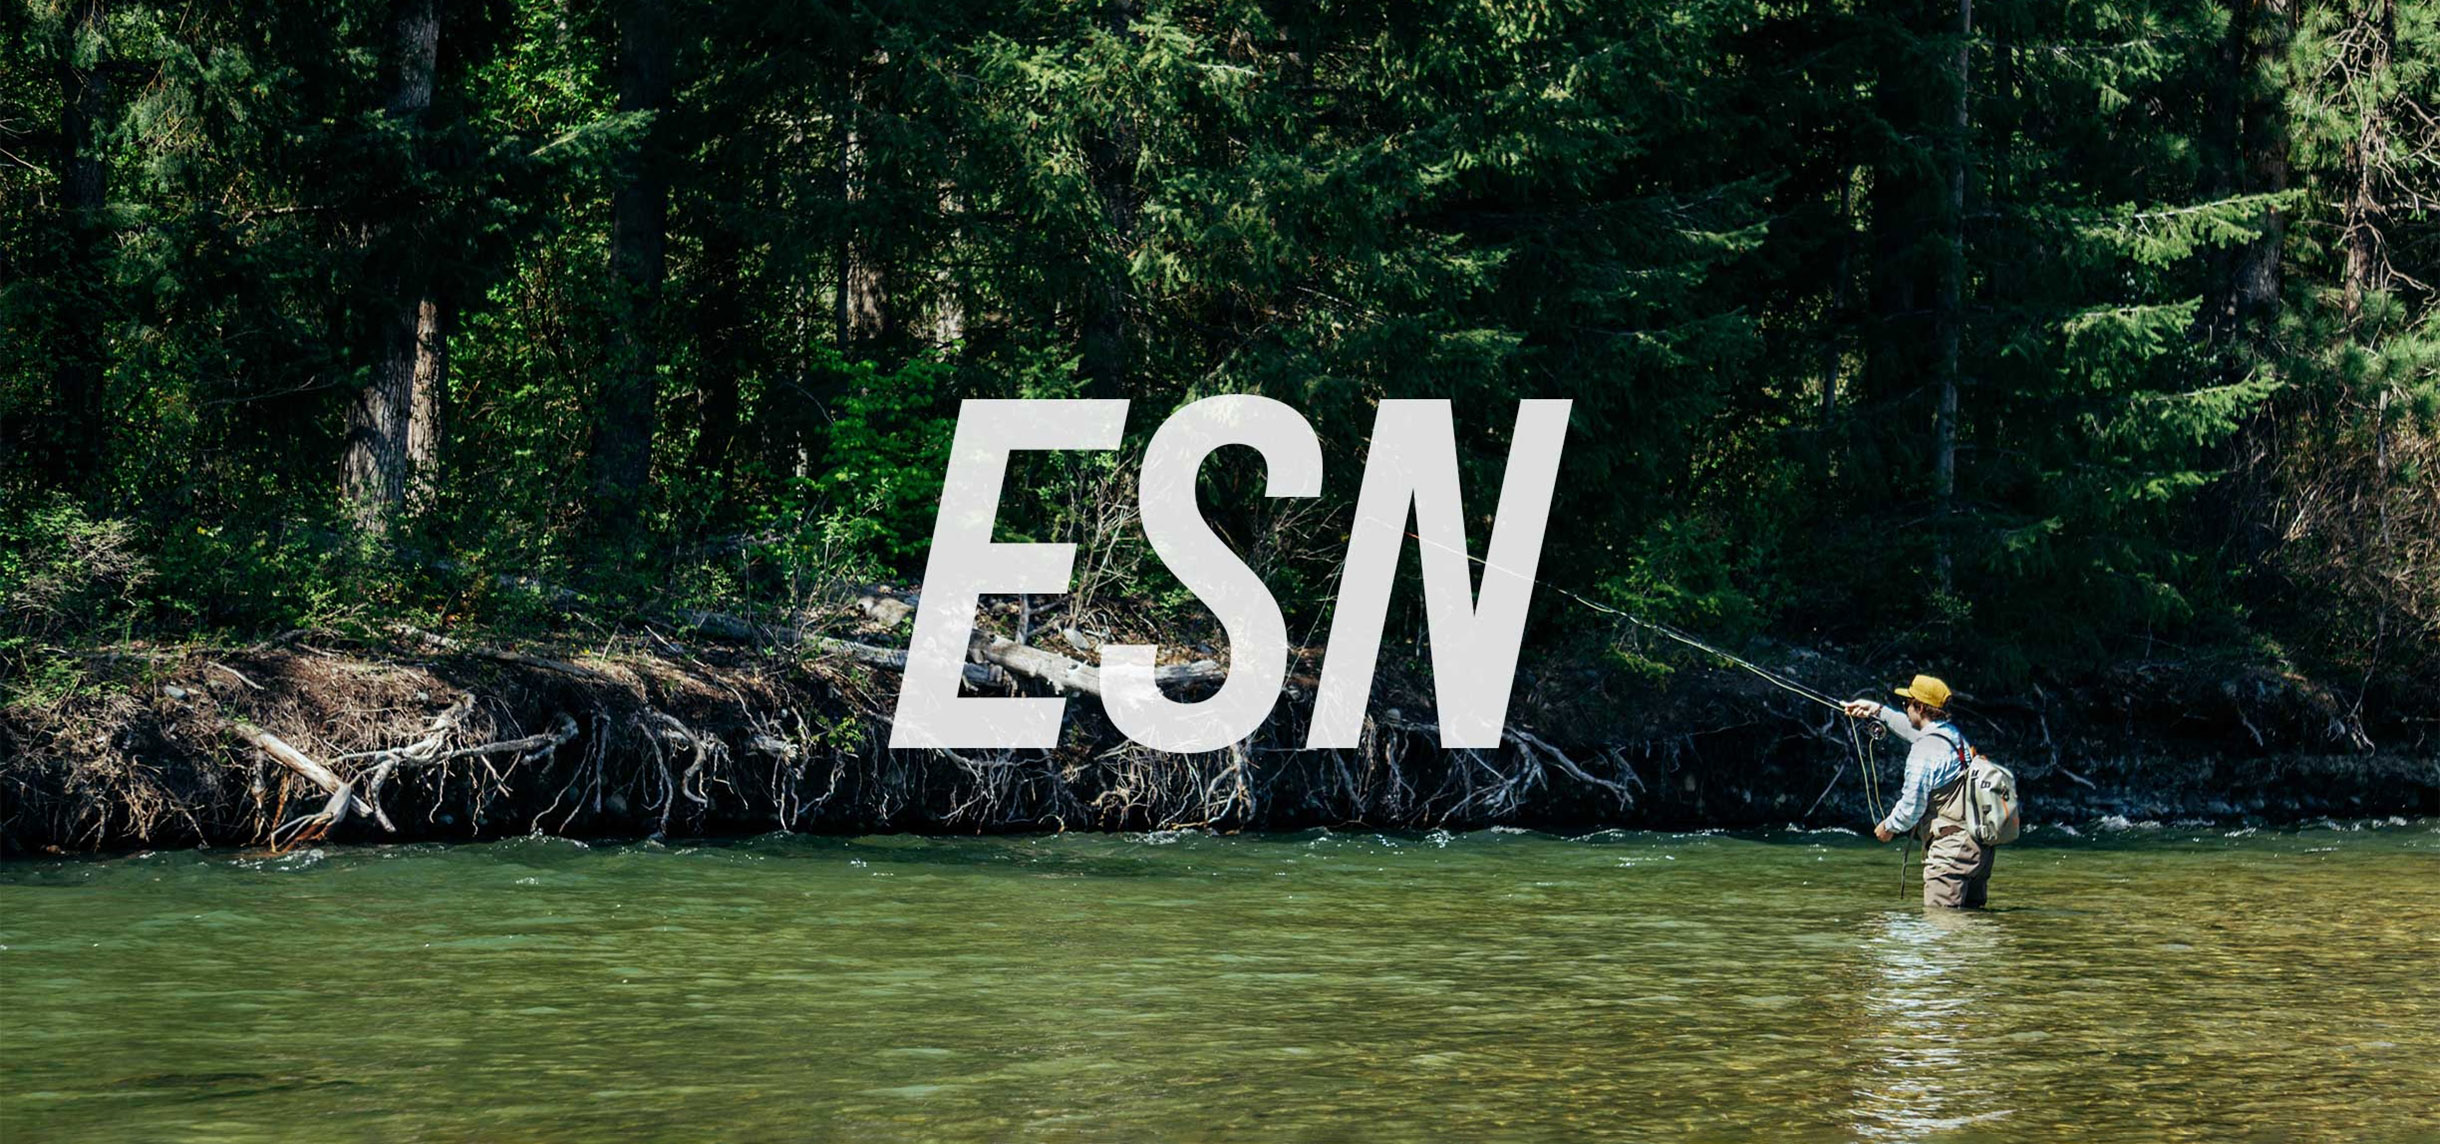 Euro Nymph | Sage ESN 3-weight and Sage ESN reel outfit